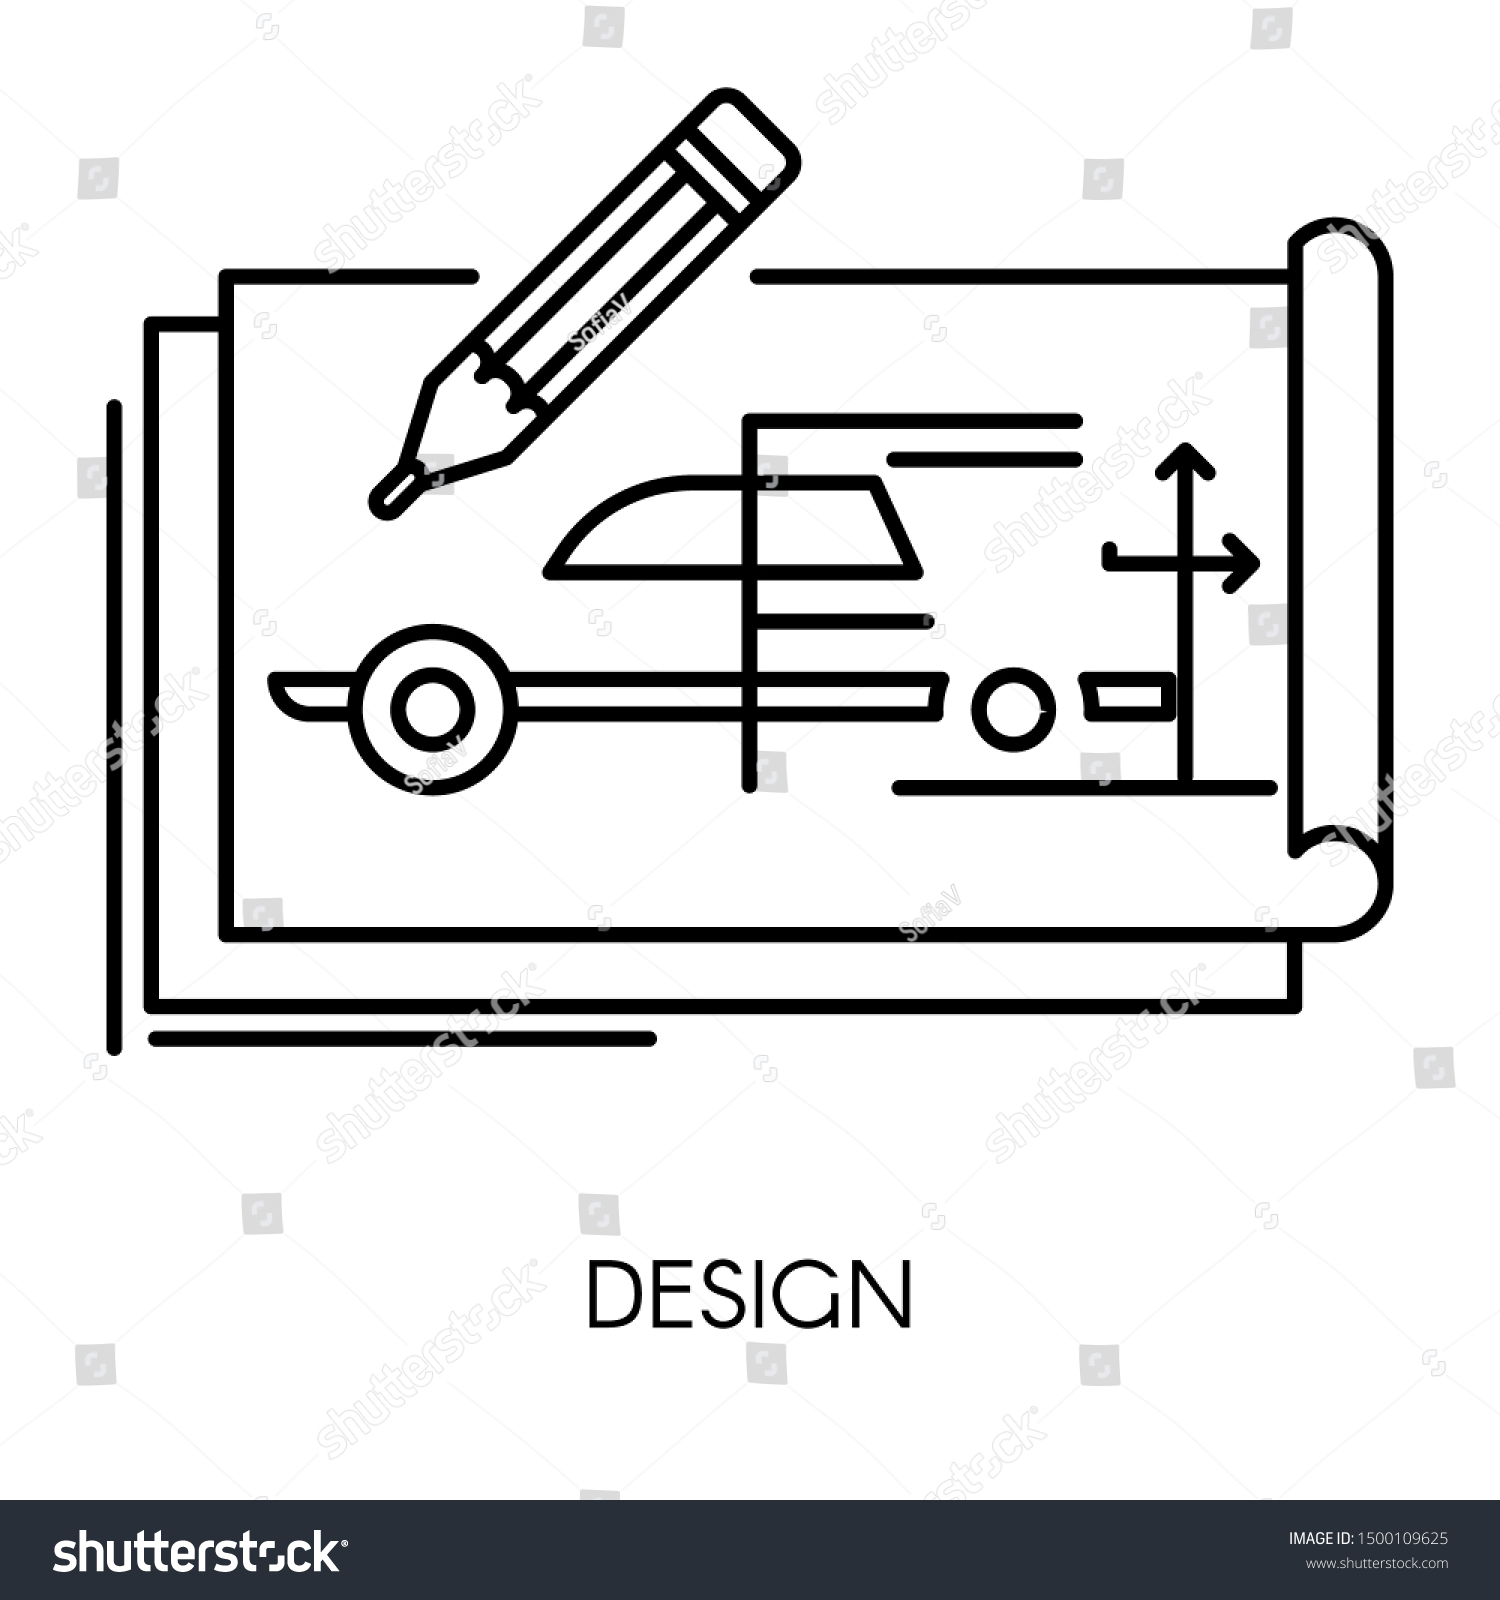 Mechanical Engineering Drawing Technical Design Isolated Stock Vector  (Royalty Free) 1500109625